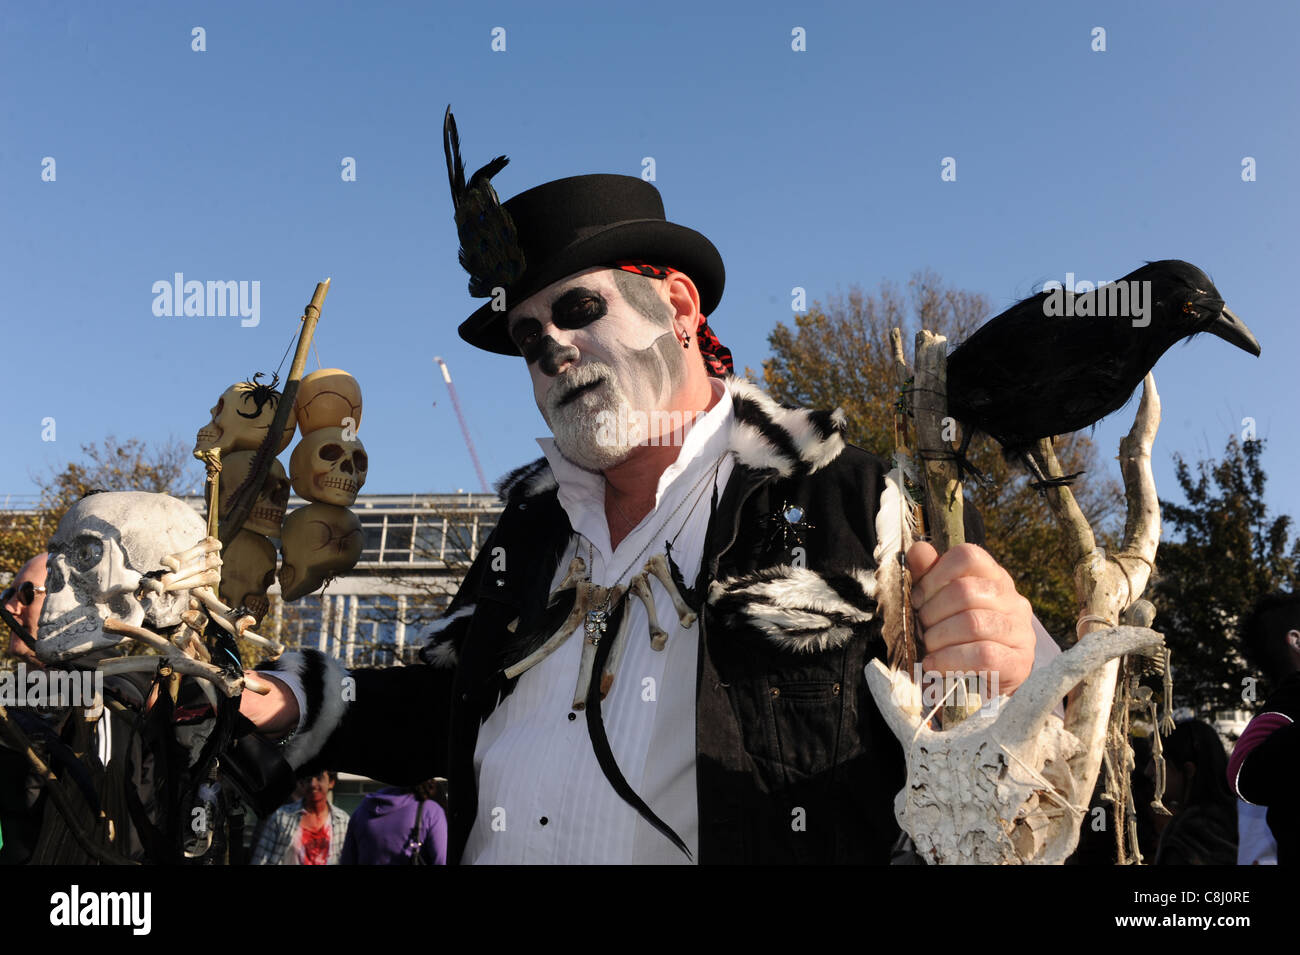 The Beach of the Dead Zombie Walk which took place in Brighton city centre UK October 2011 Stock Photo